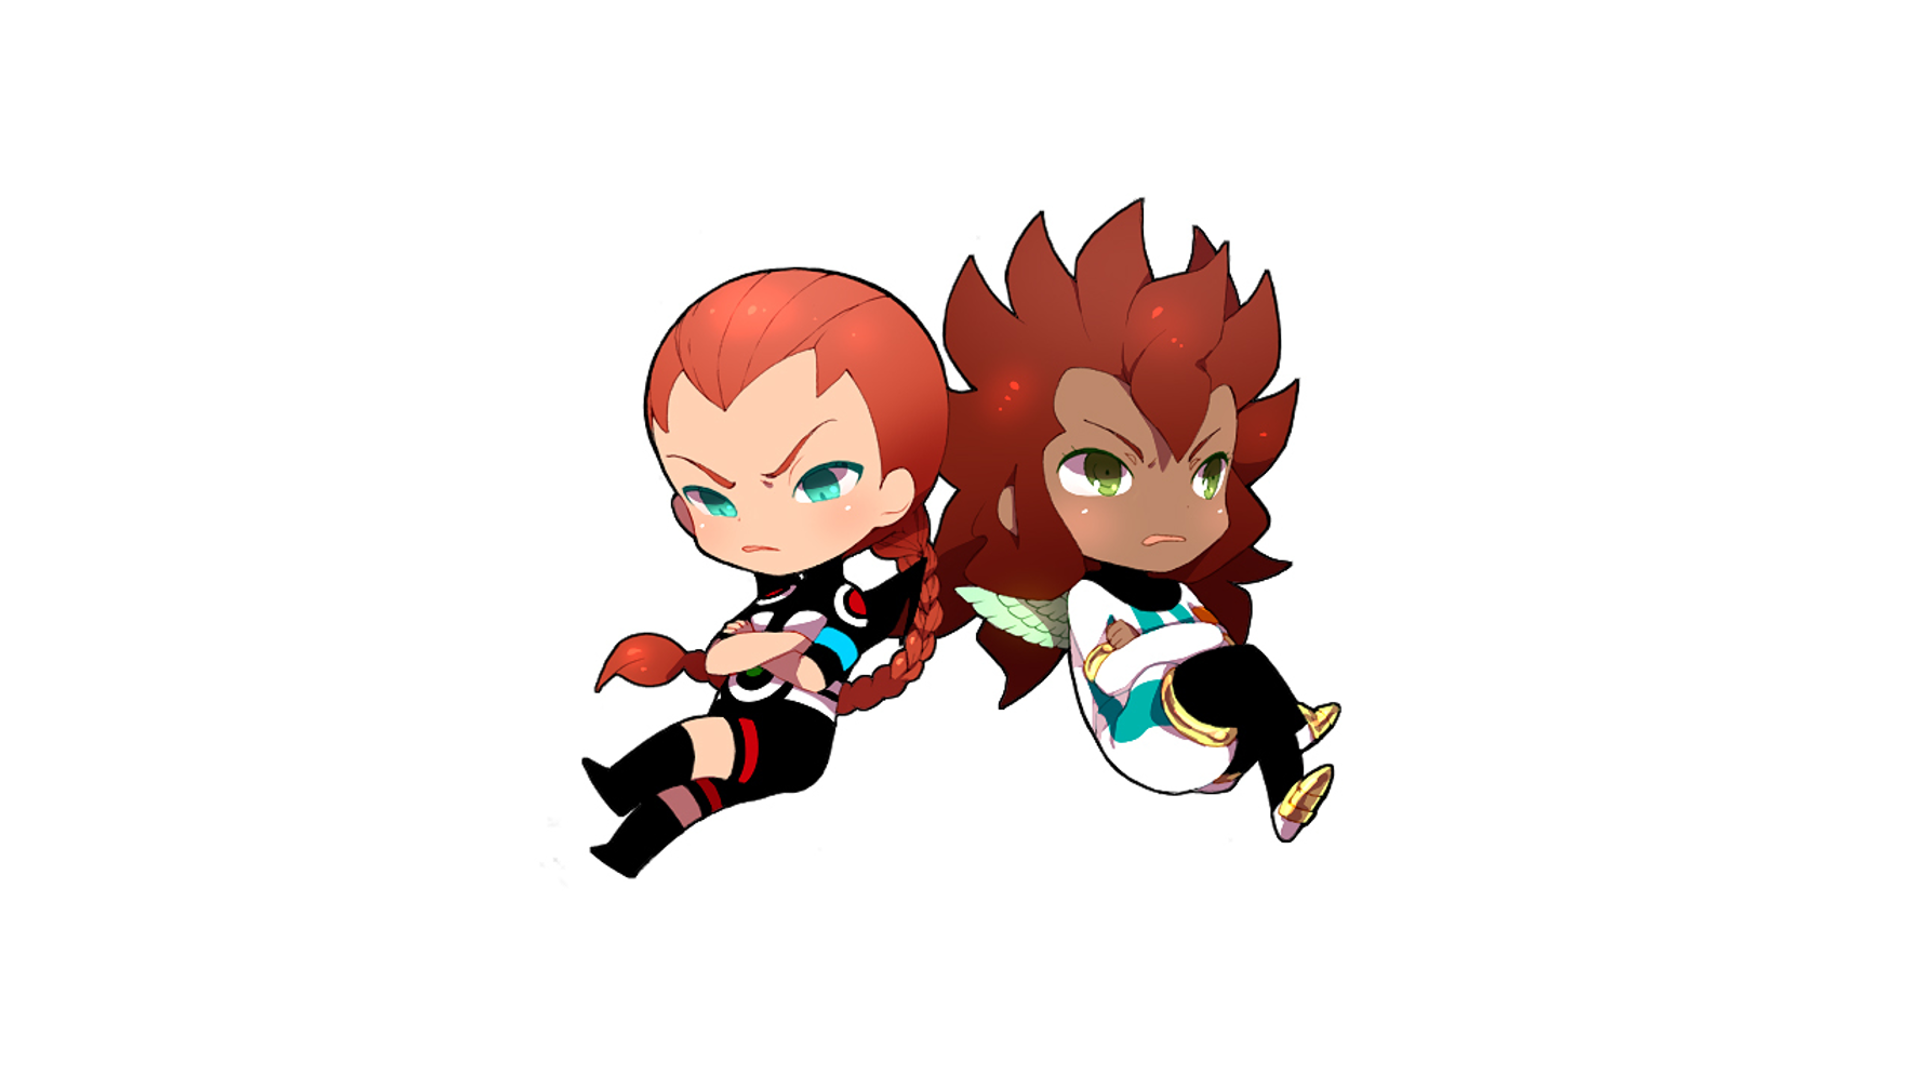 20+ Inazuma Eleven GO HD Wallpapers and Backgrounds